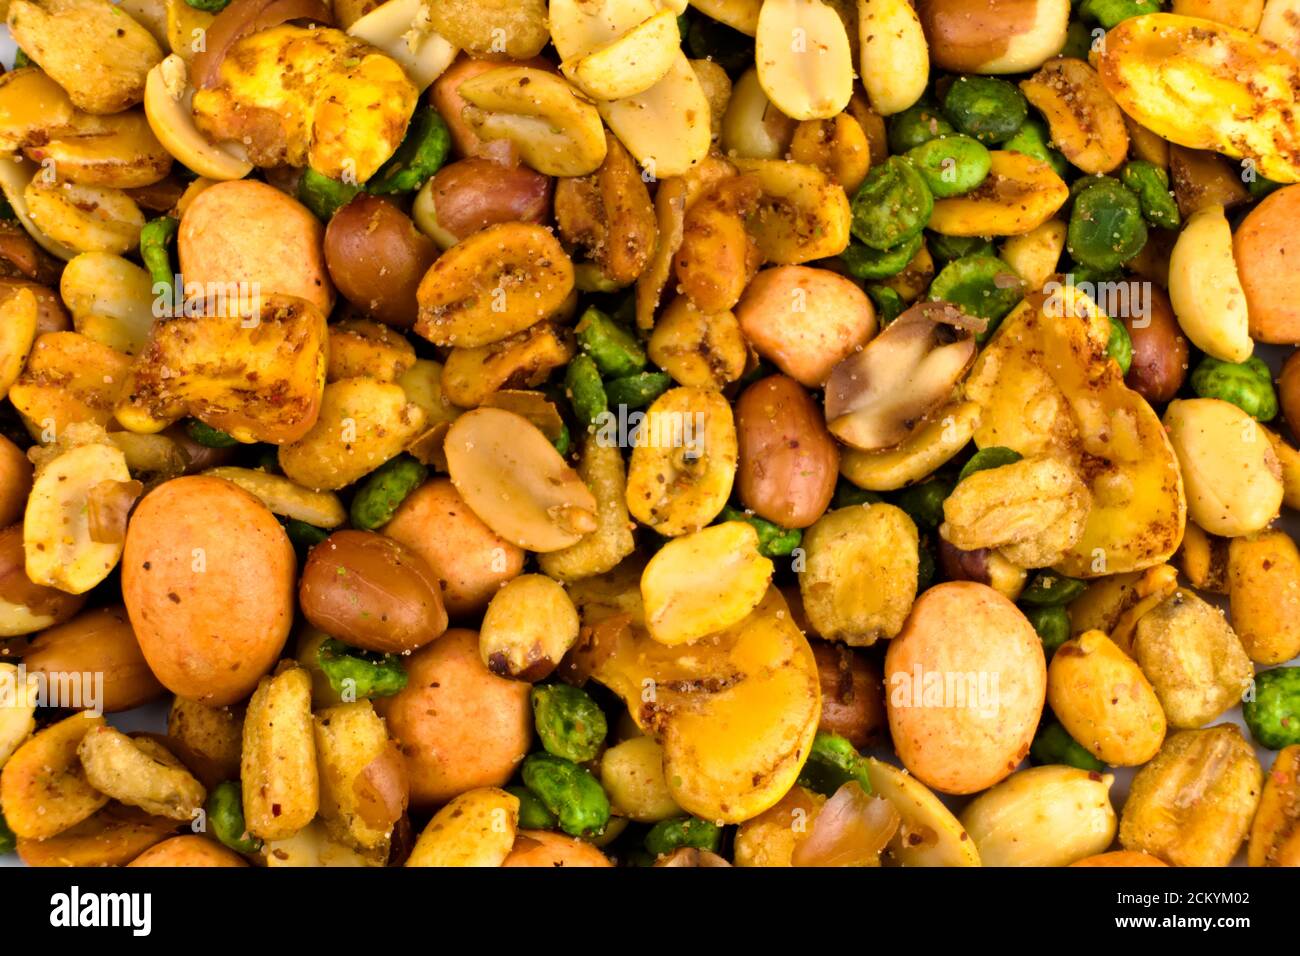 Close-up a Mexican mixed snack food composed of peanuts, Peas, Cracker nuts, broad beans, salted and seasoned with chili peppers powder Stock Photo